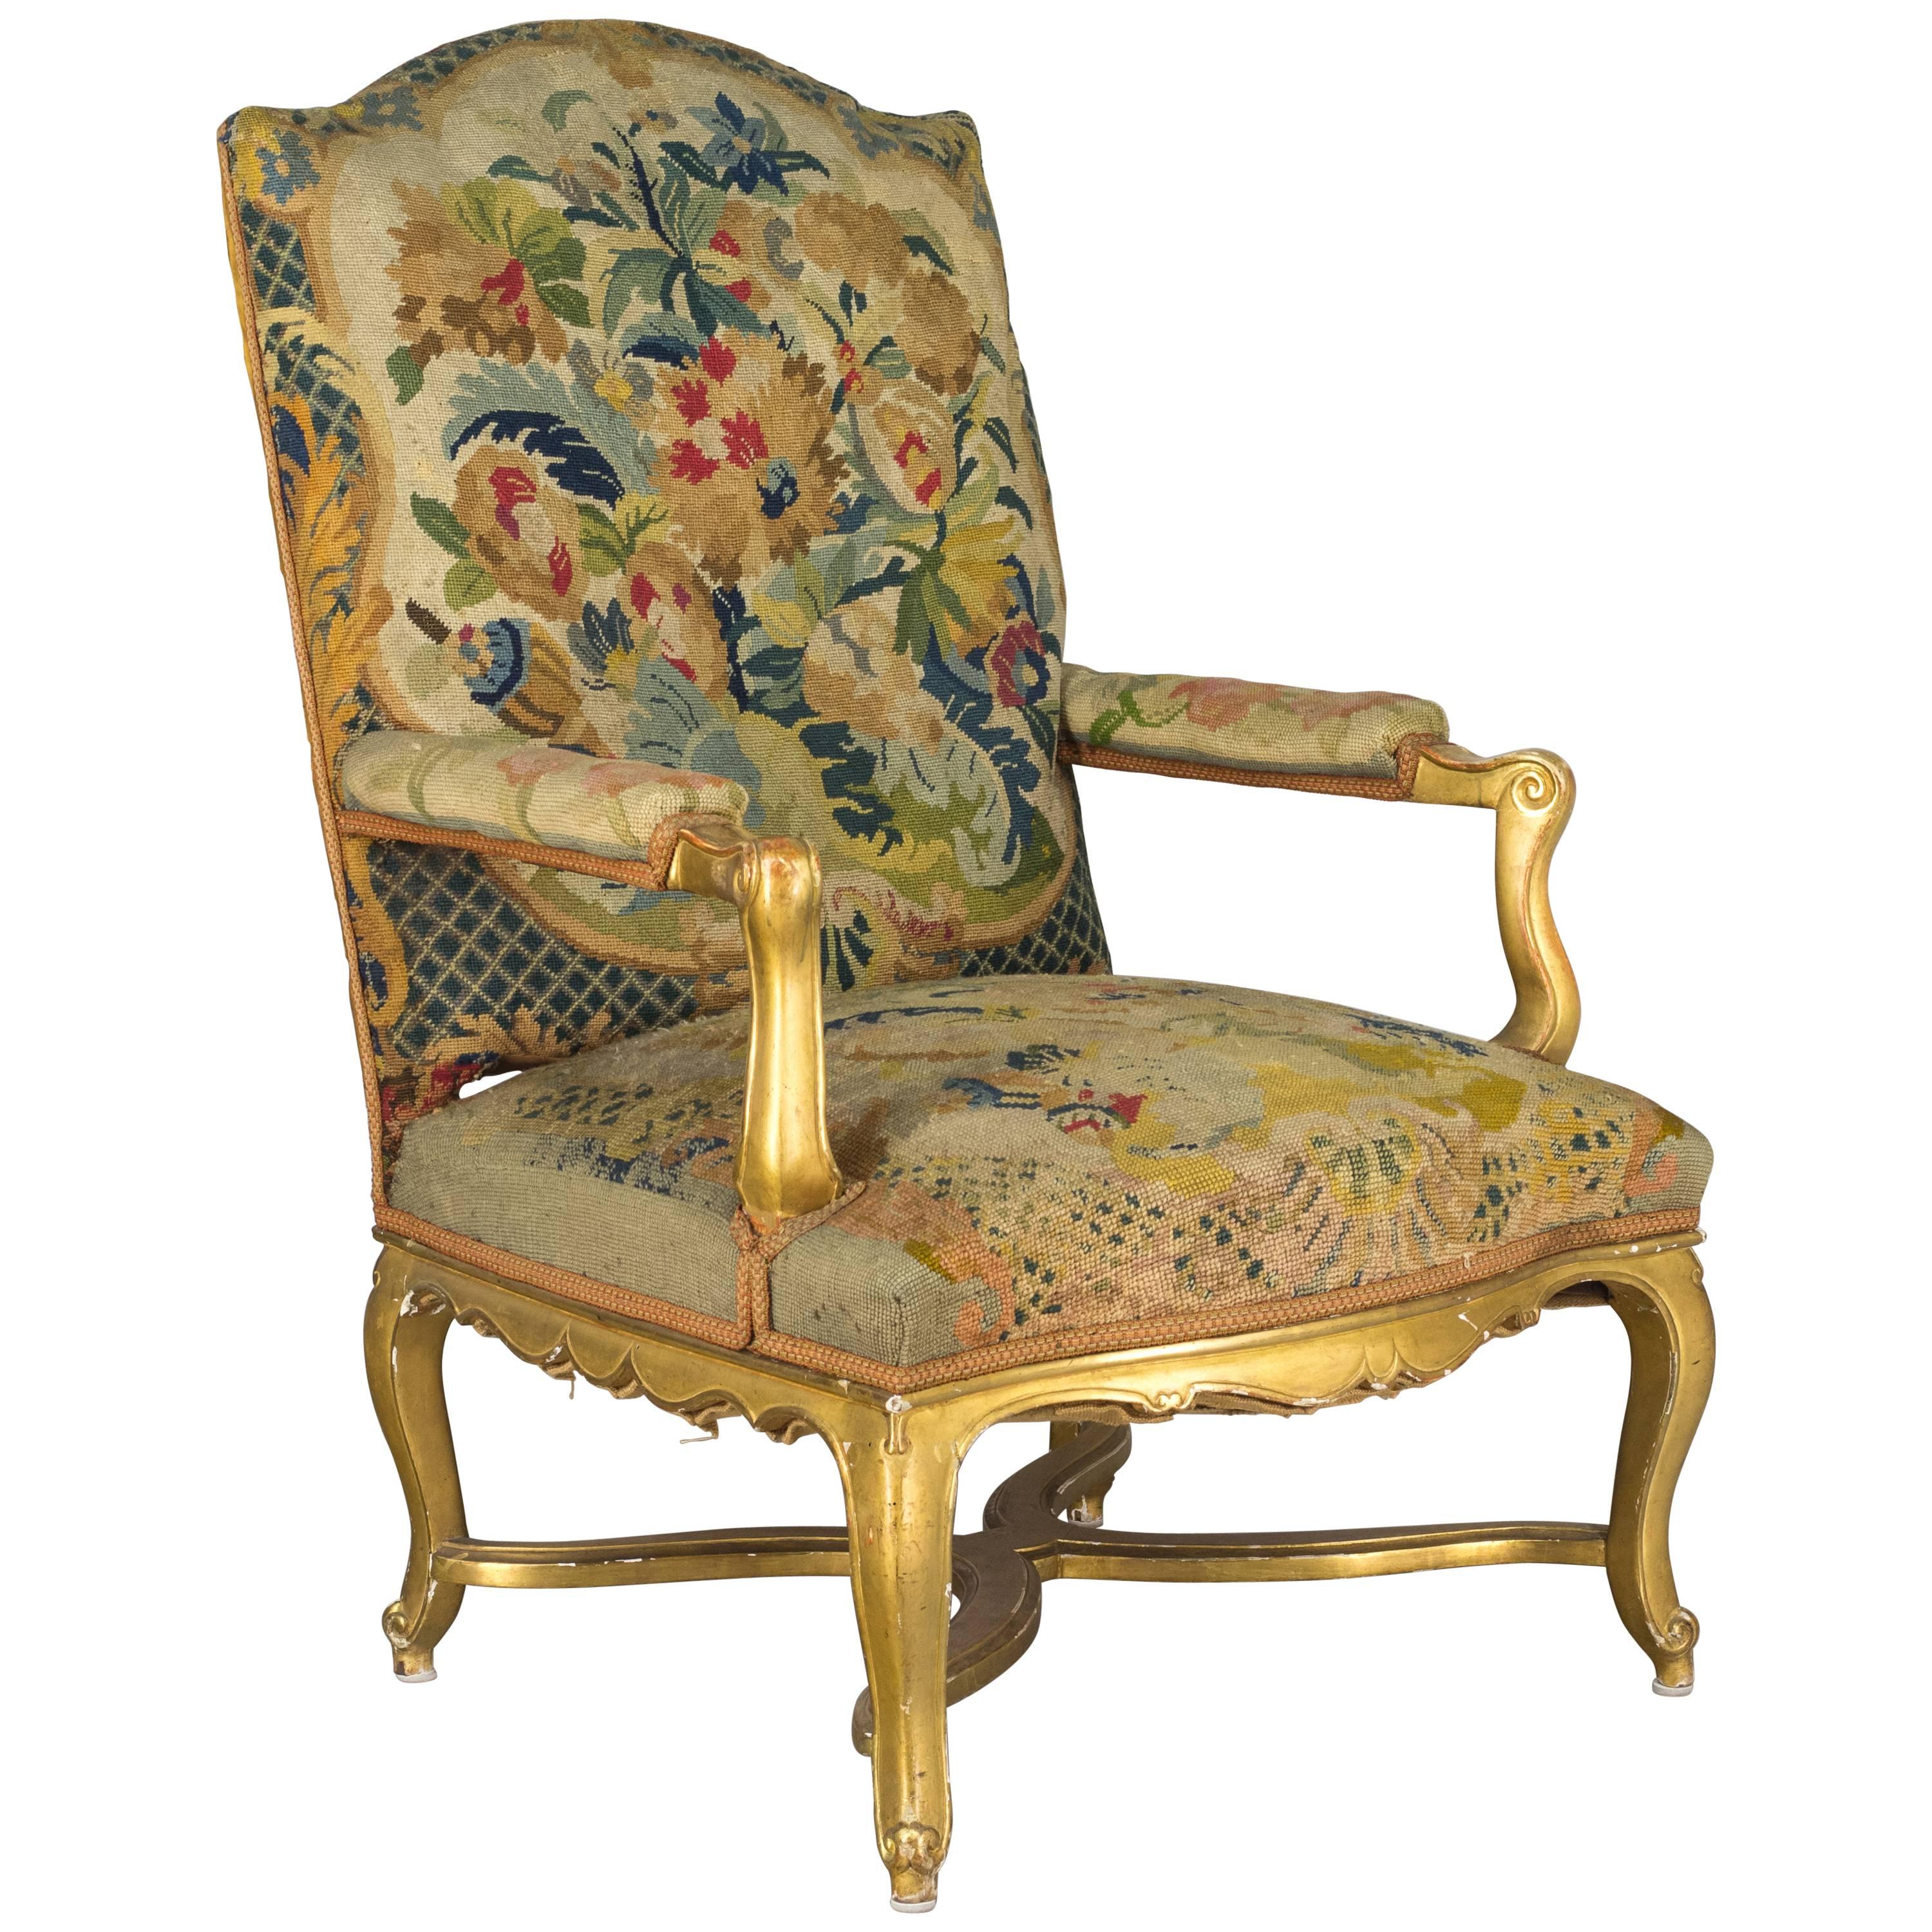 19th Century French Gilded Fauteuil or Armchair